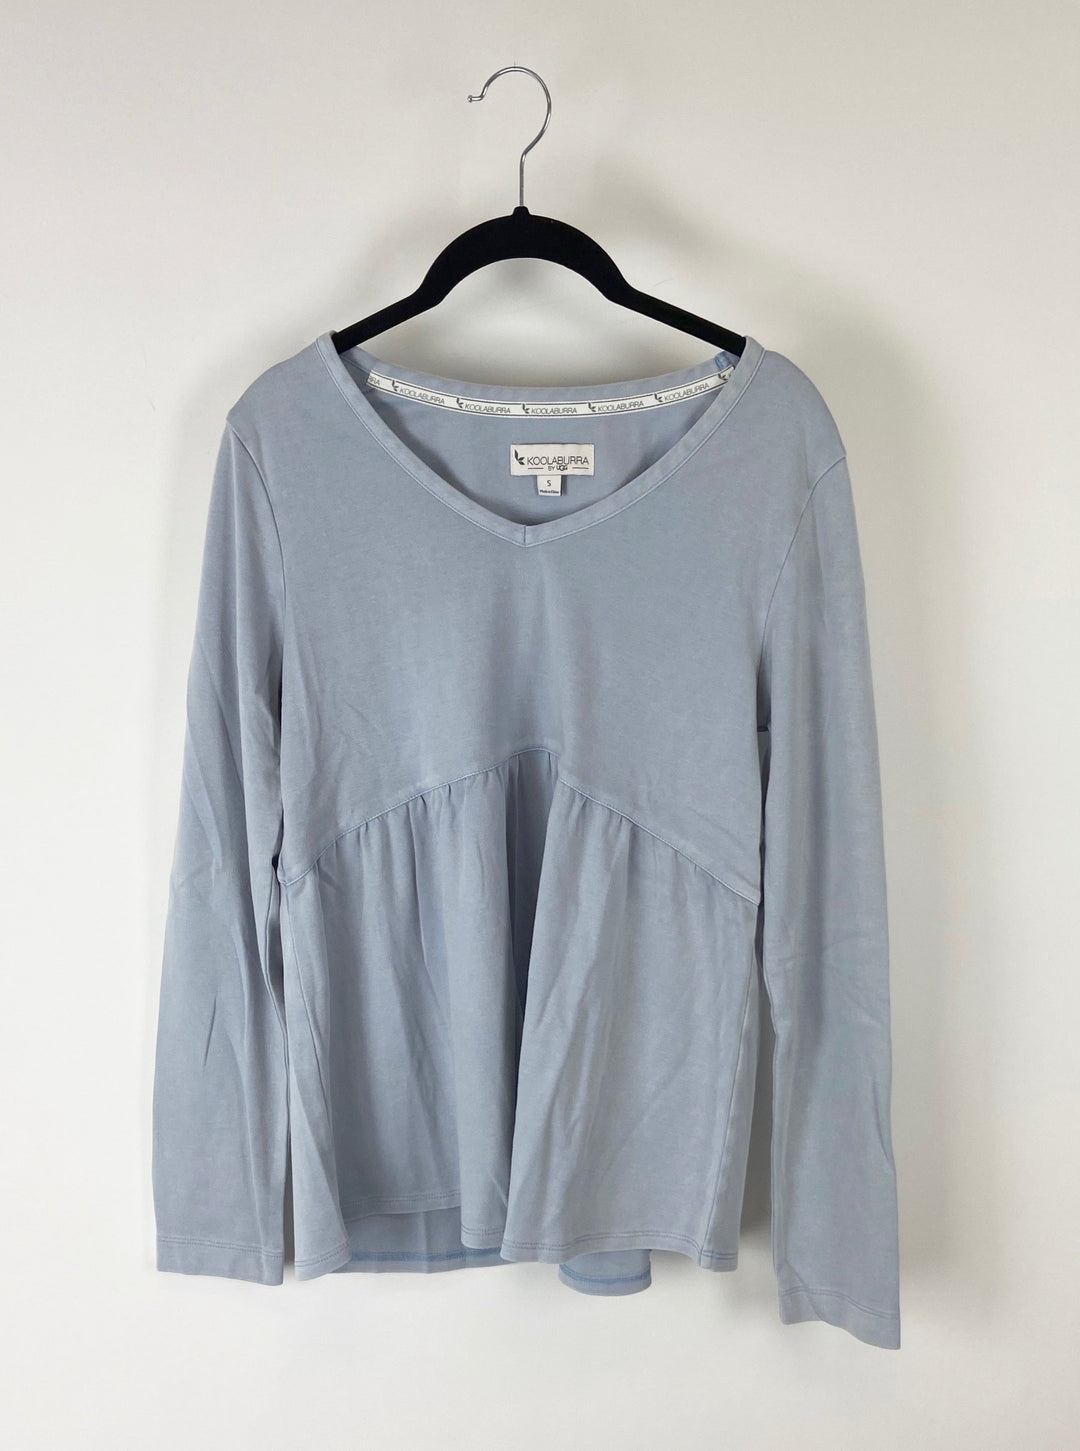 Light Grey Long Sleeve Top - Small and 1X